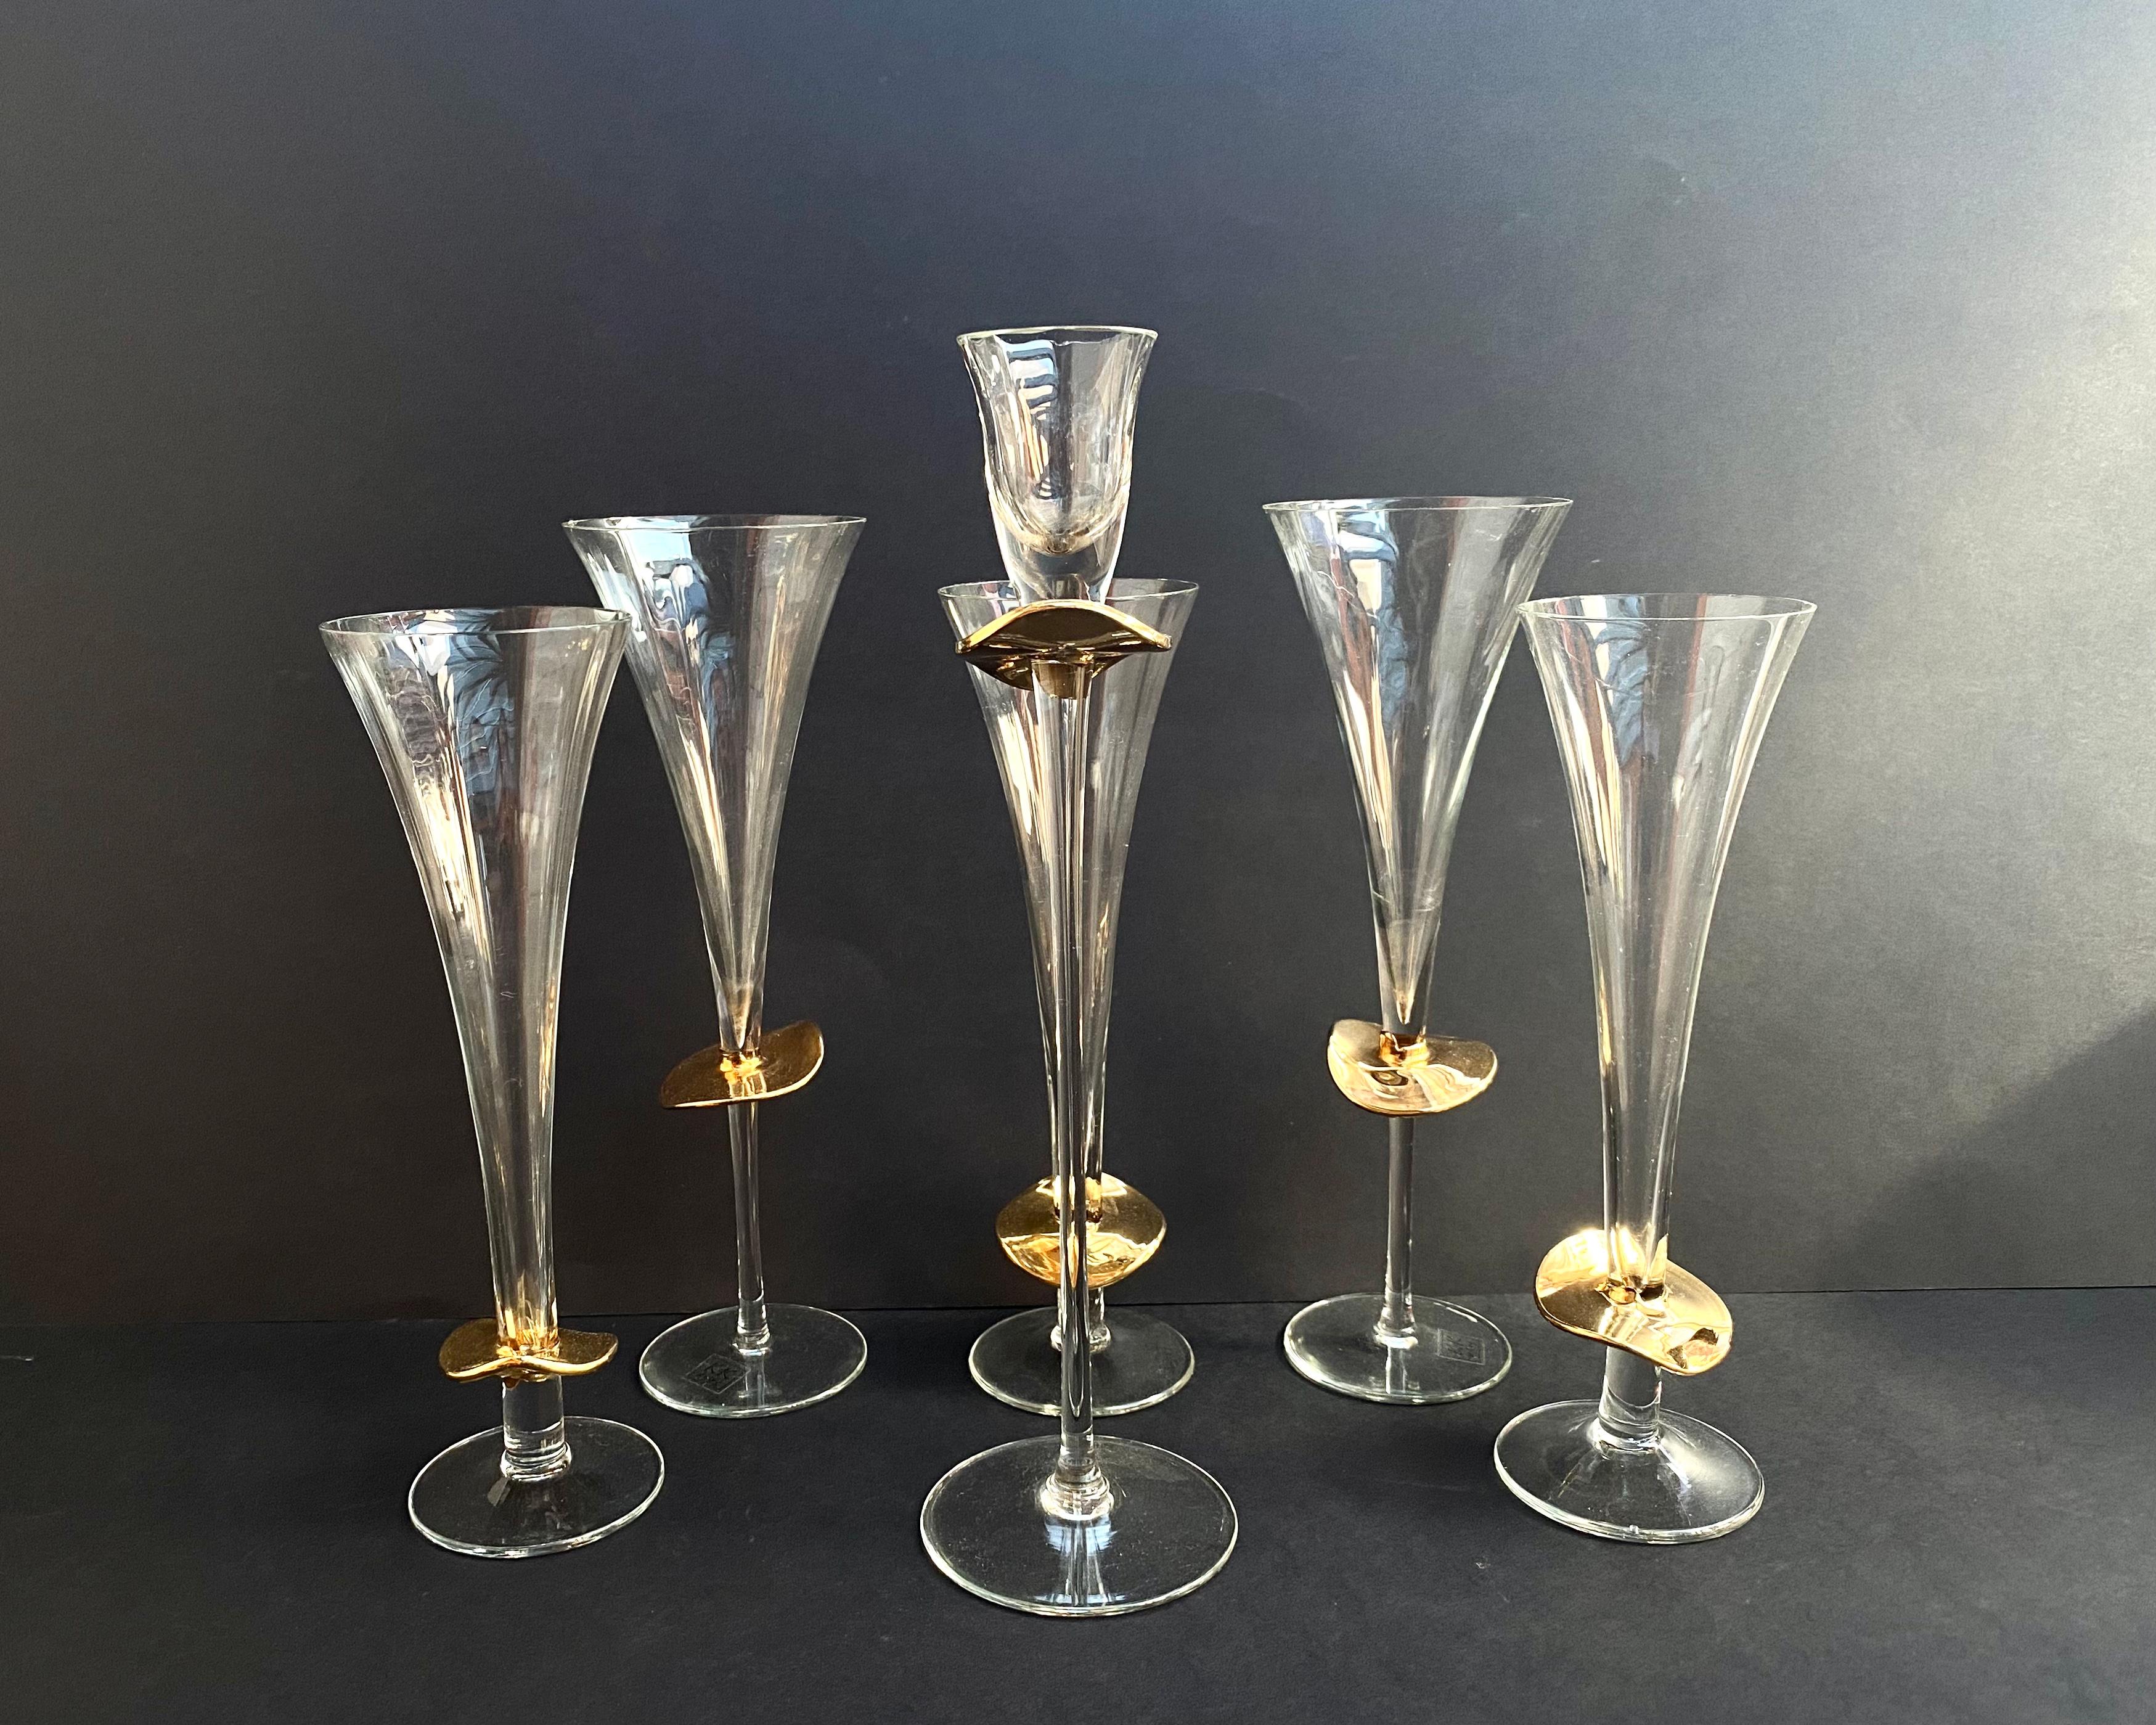 Gorgeous Rare Set of Crystal Glasses and Candlestick with 24k gold by German manufactory K&K Styling.

Products are equipped with high legs and are designed to serve champagne, wine, cognac or other liquids.

The glasses are hand-cut and munge